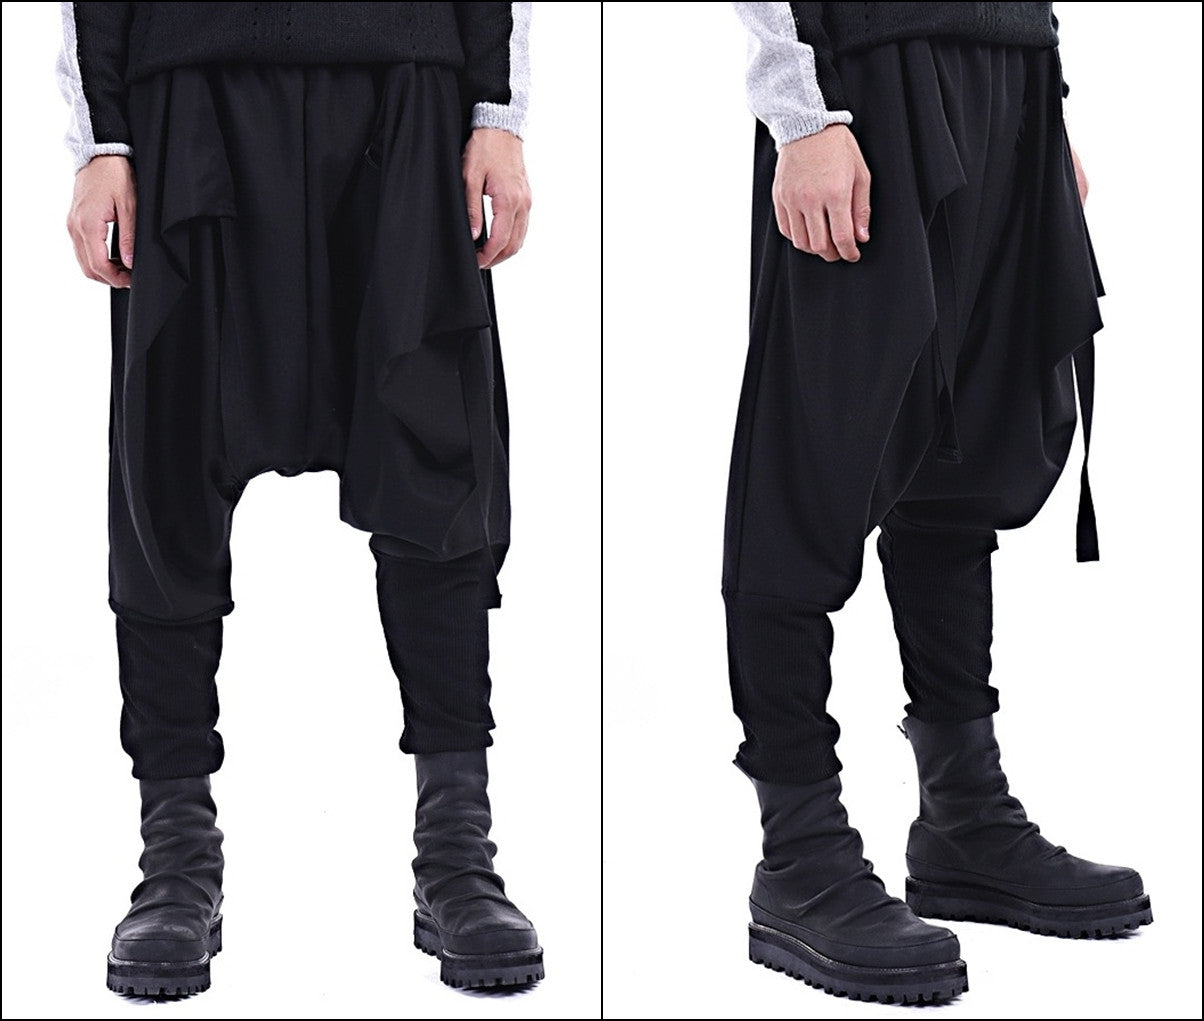 Buy Harem Pants Men, Big and Tall Clothes Men, Drop Crotch Pants, Sarouel  Homme, Haremhose Herren, High Waisted Harem Trousers Online in India - Etsy